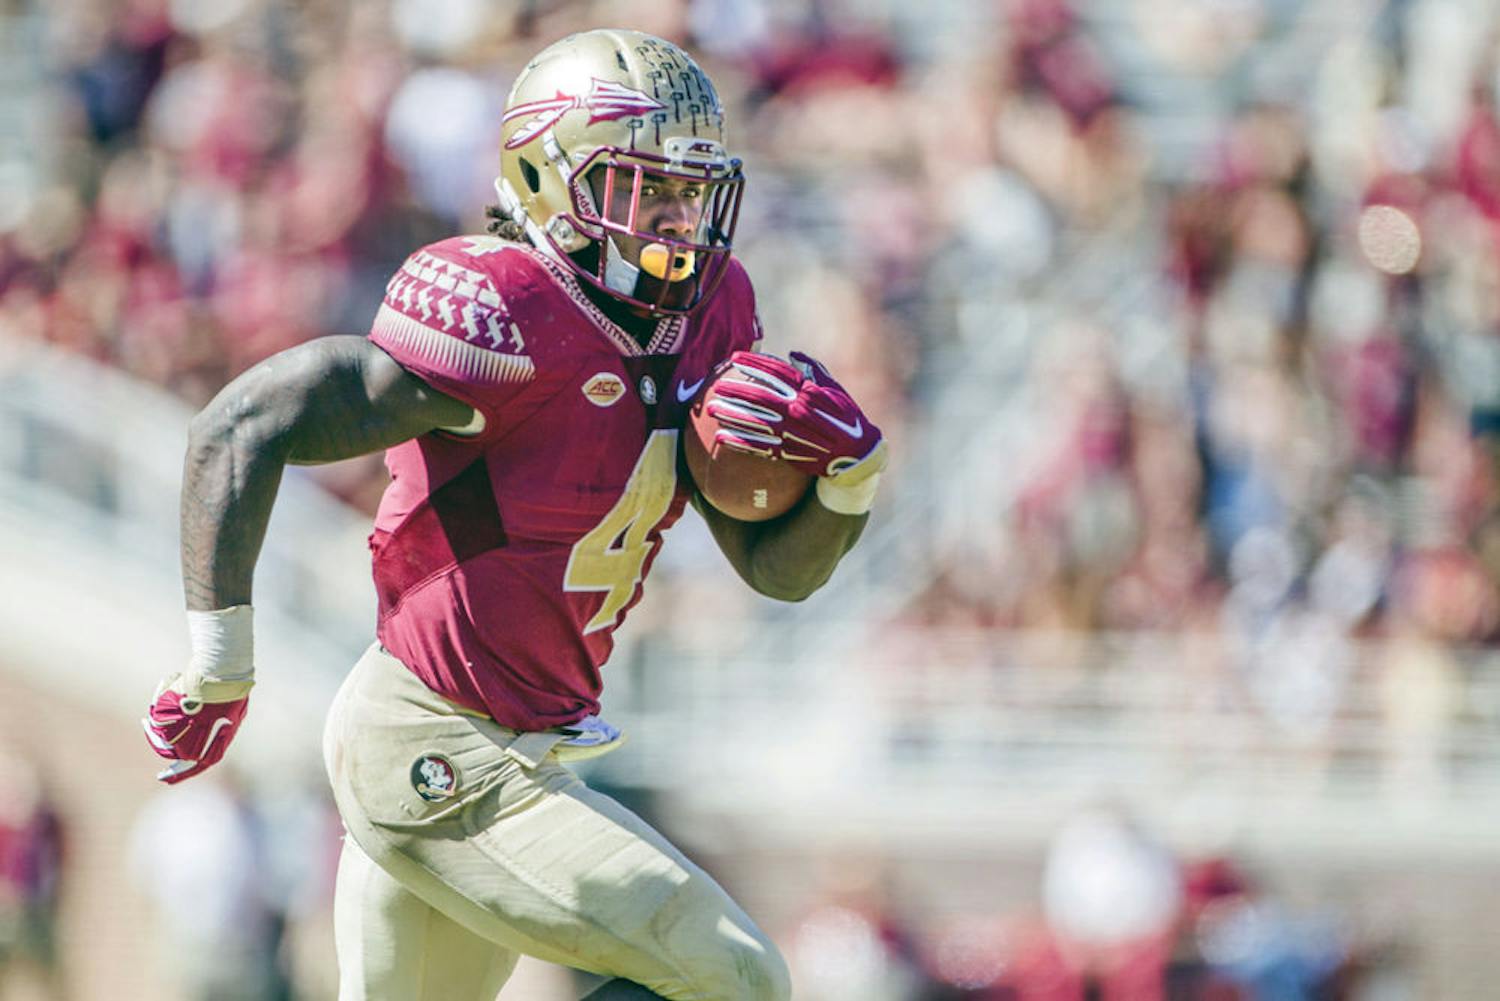 Dalvin Cook is one of a plethora of college football running backs enjoying breakout seasons.